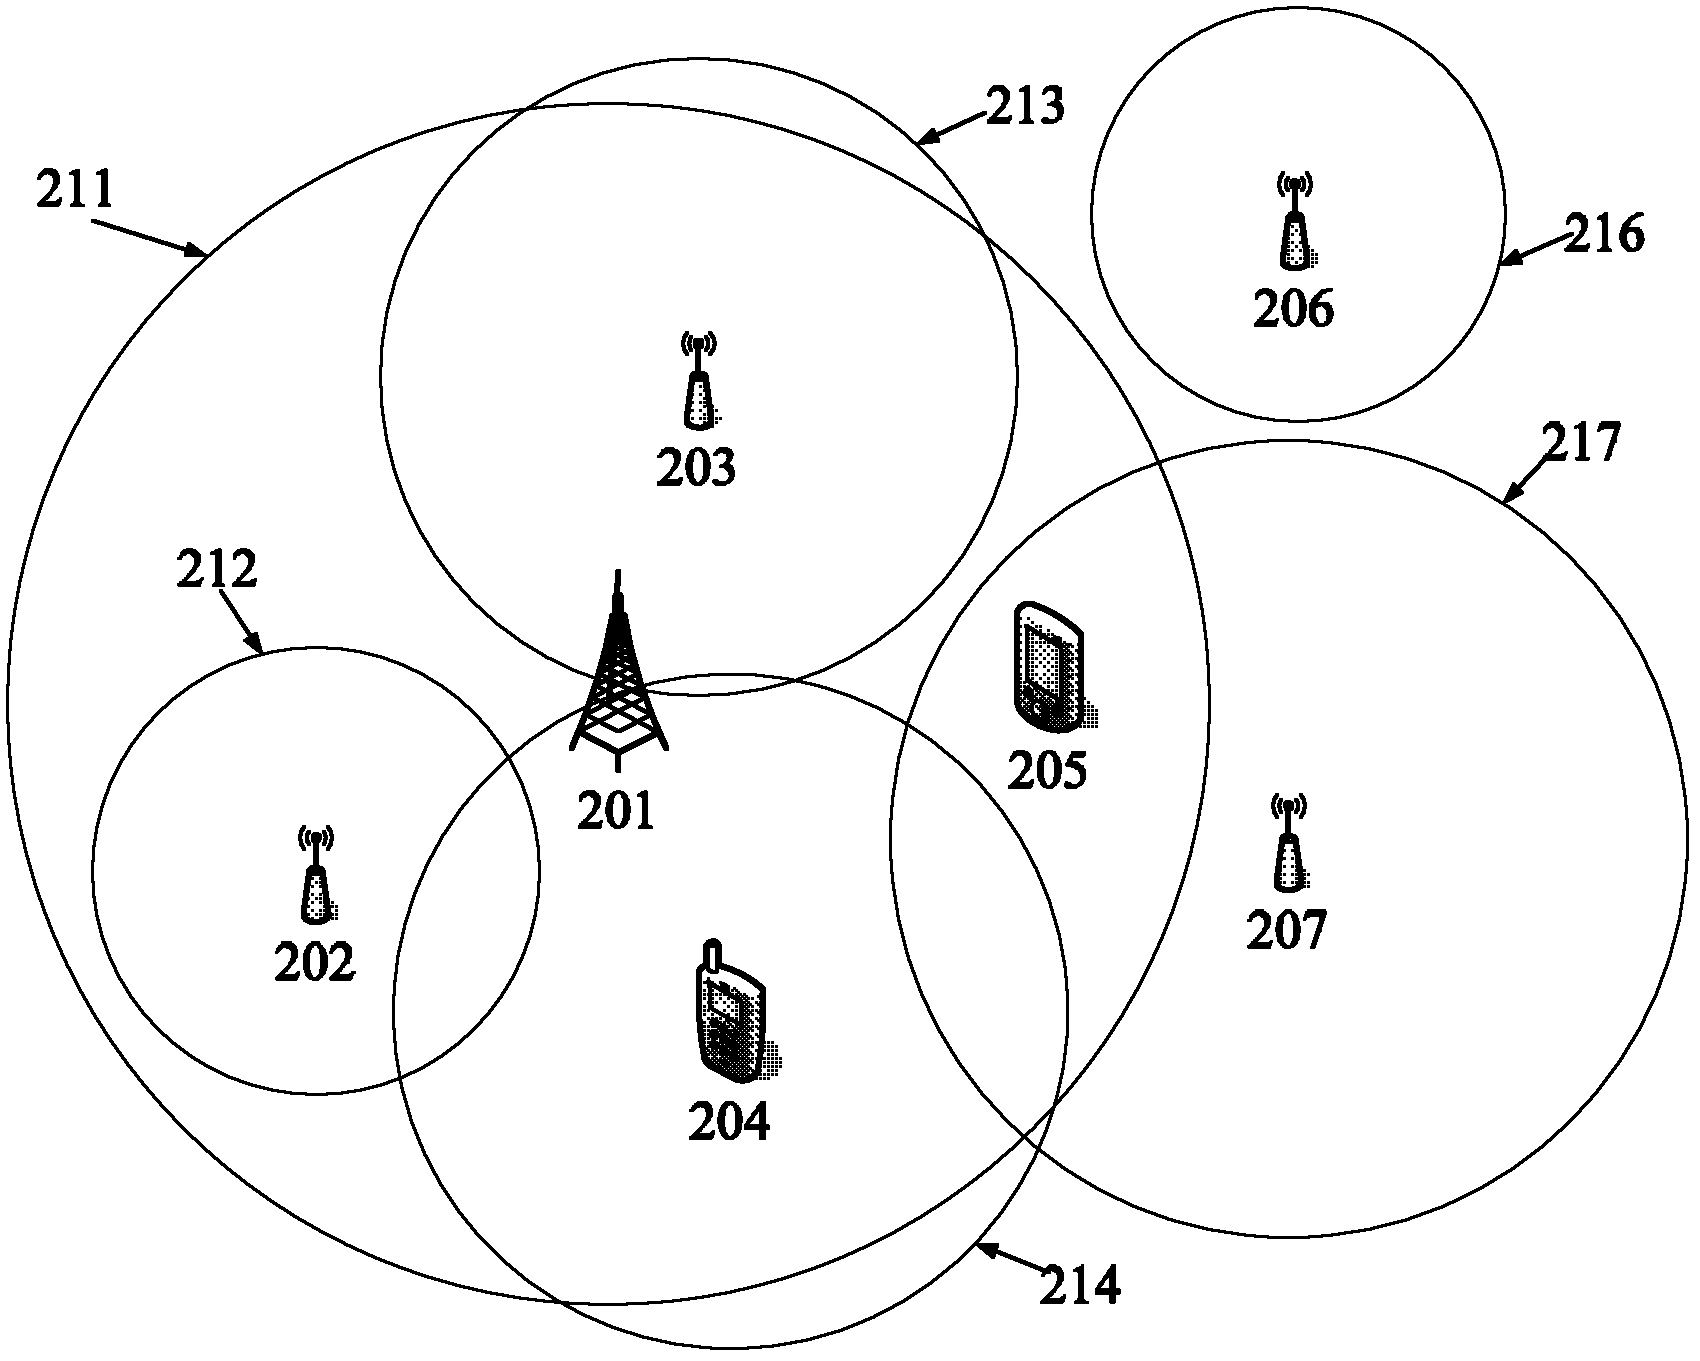 Method for avoiding interfering hidden terminal communication of authorized users